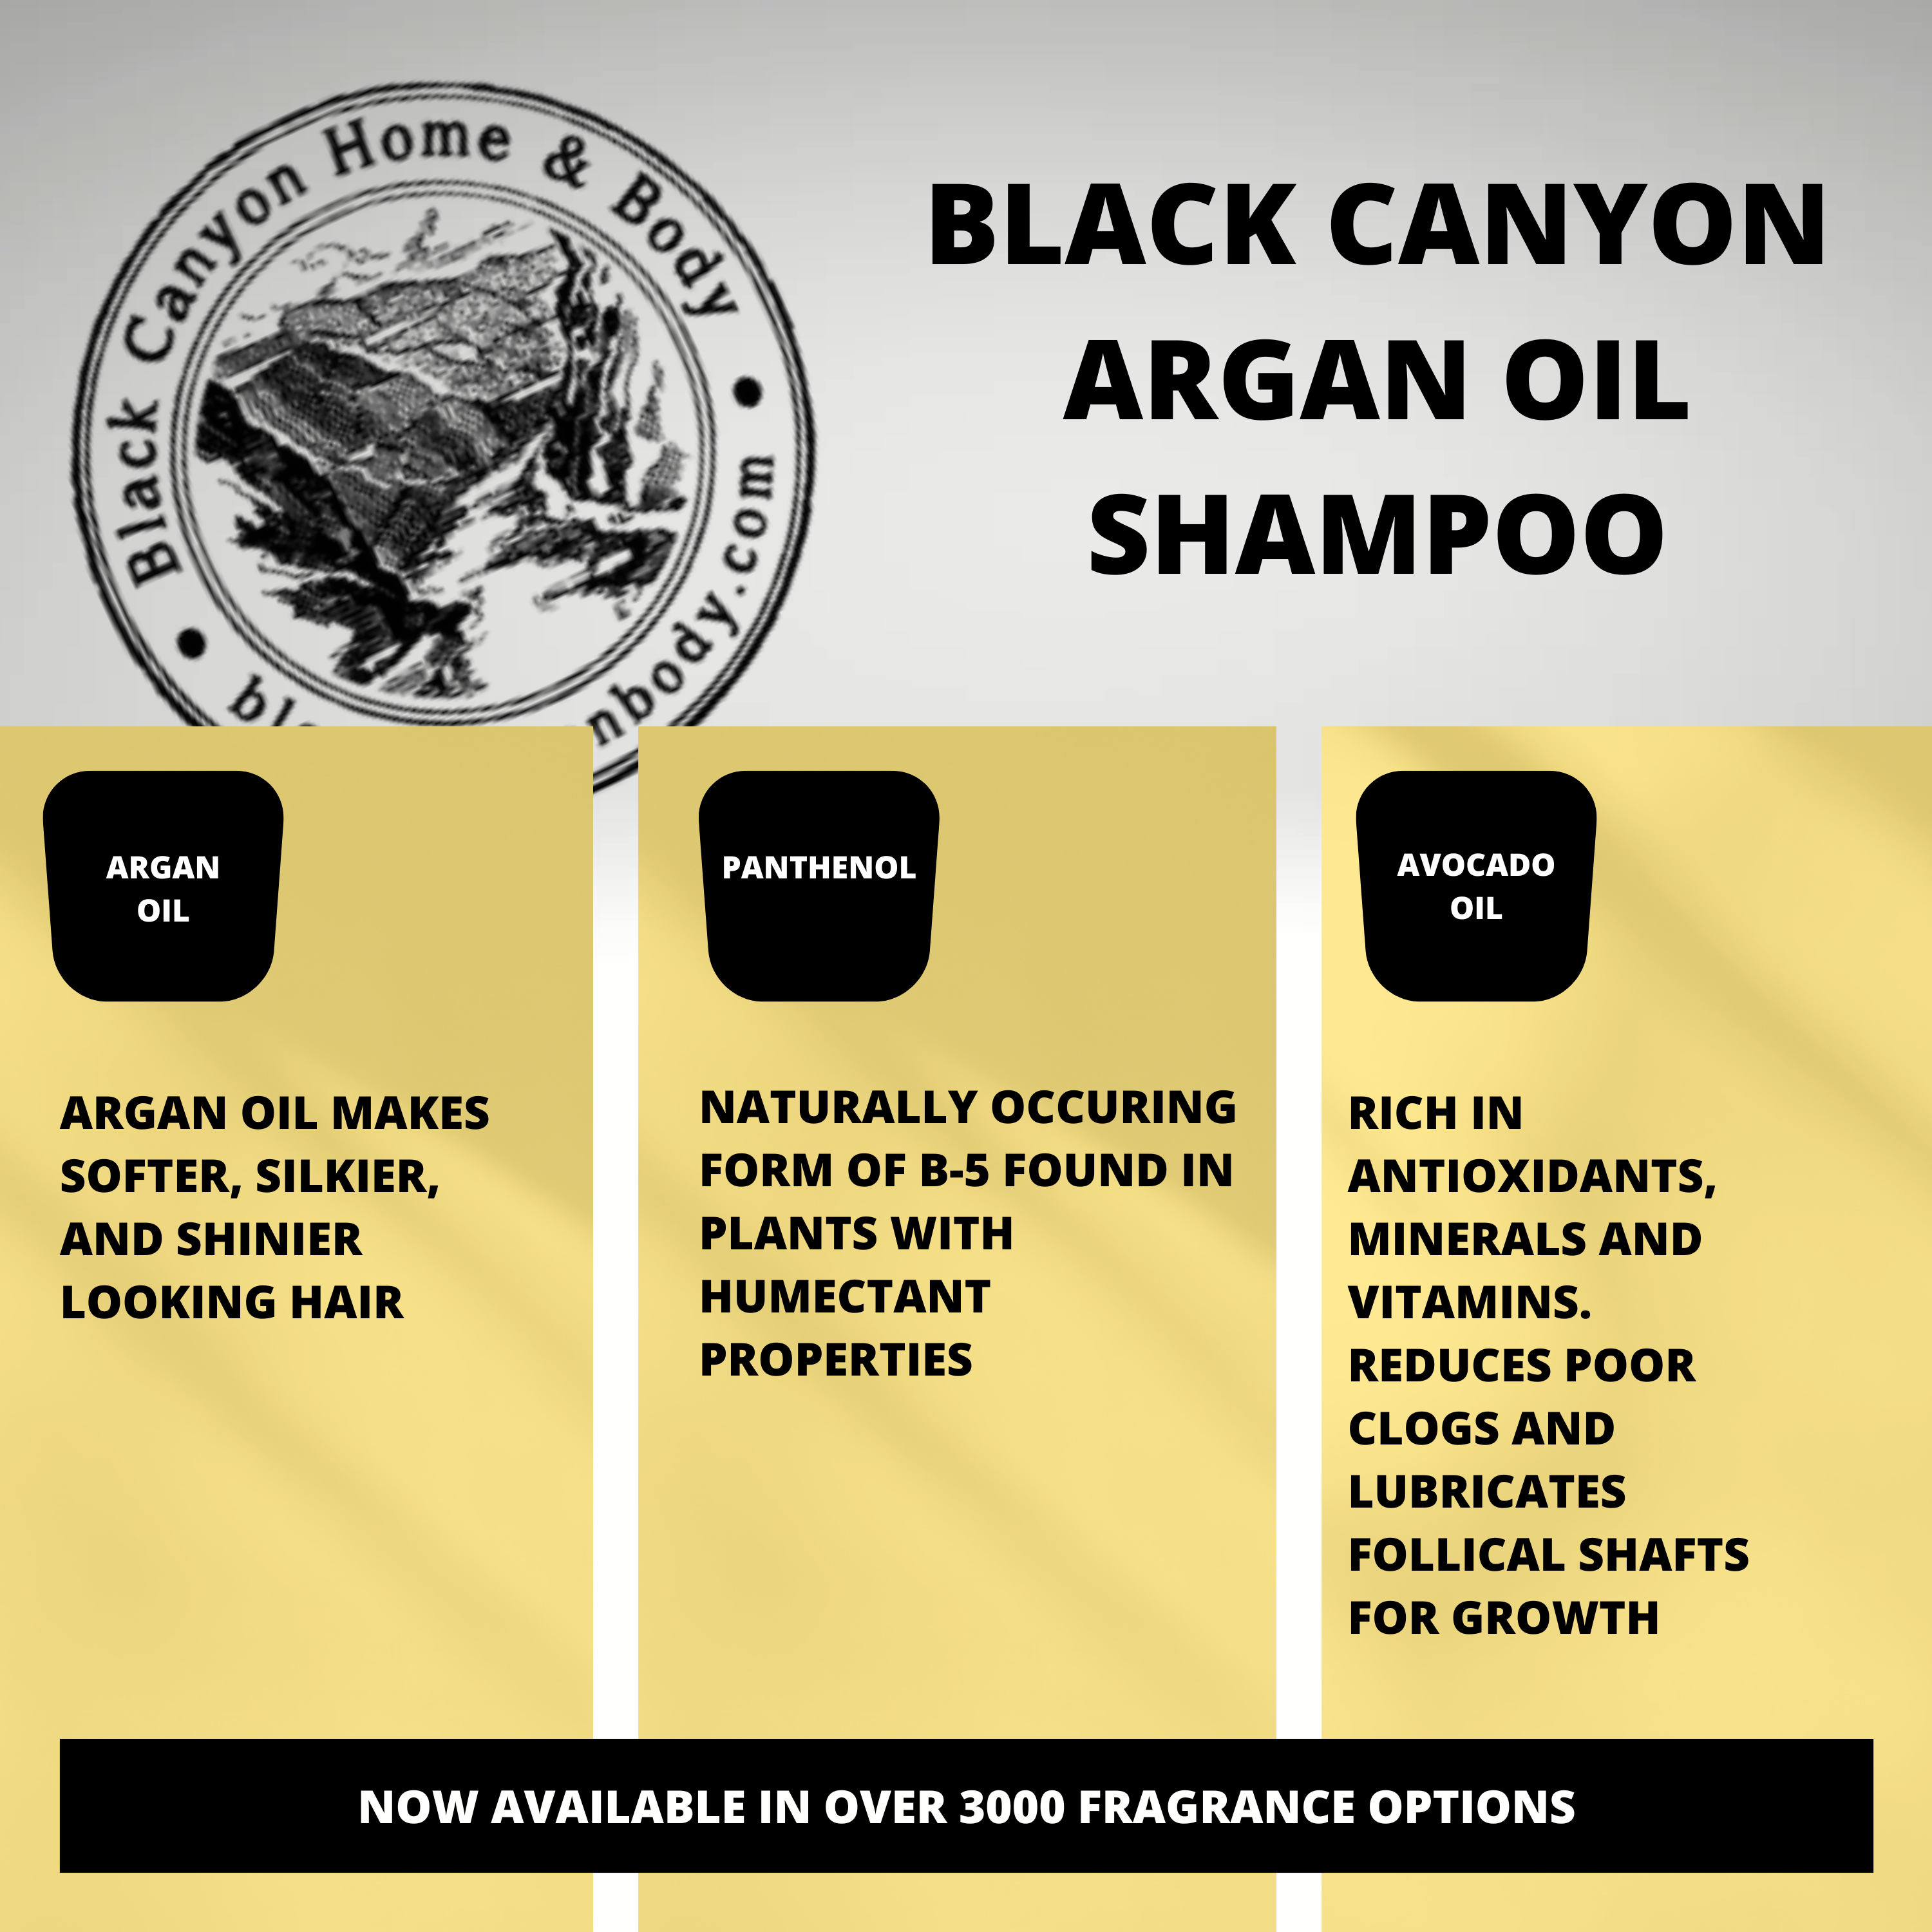 Black Canyon Amber Cinnamon Scented Shampoo with Argan Oil